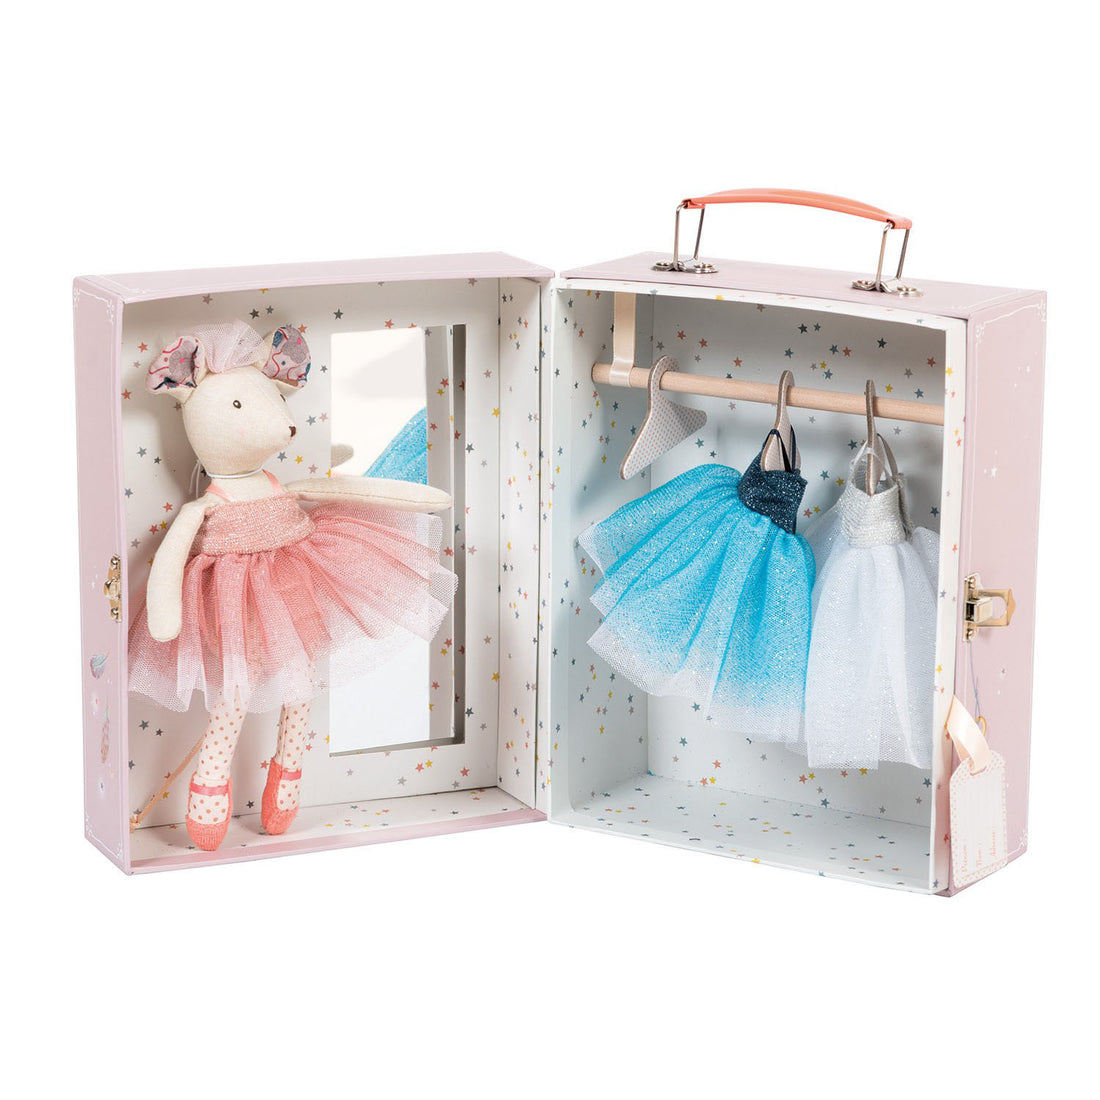 moulin-roty-fairytales-ballerina-suitcase-lilac- (1)